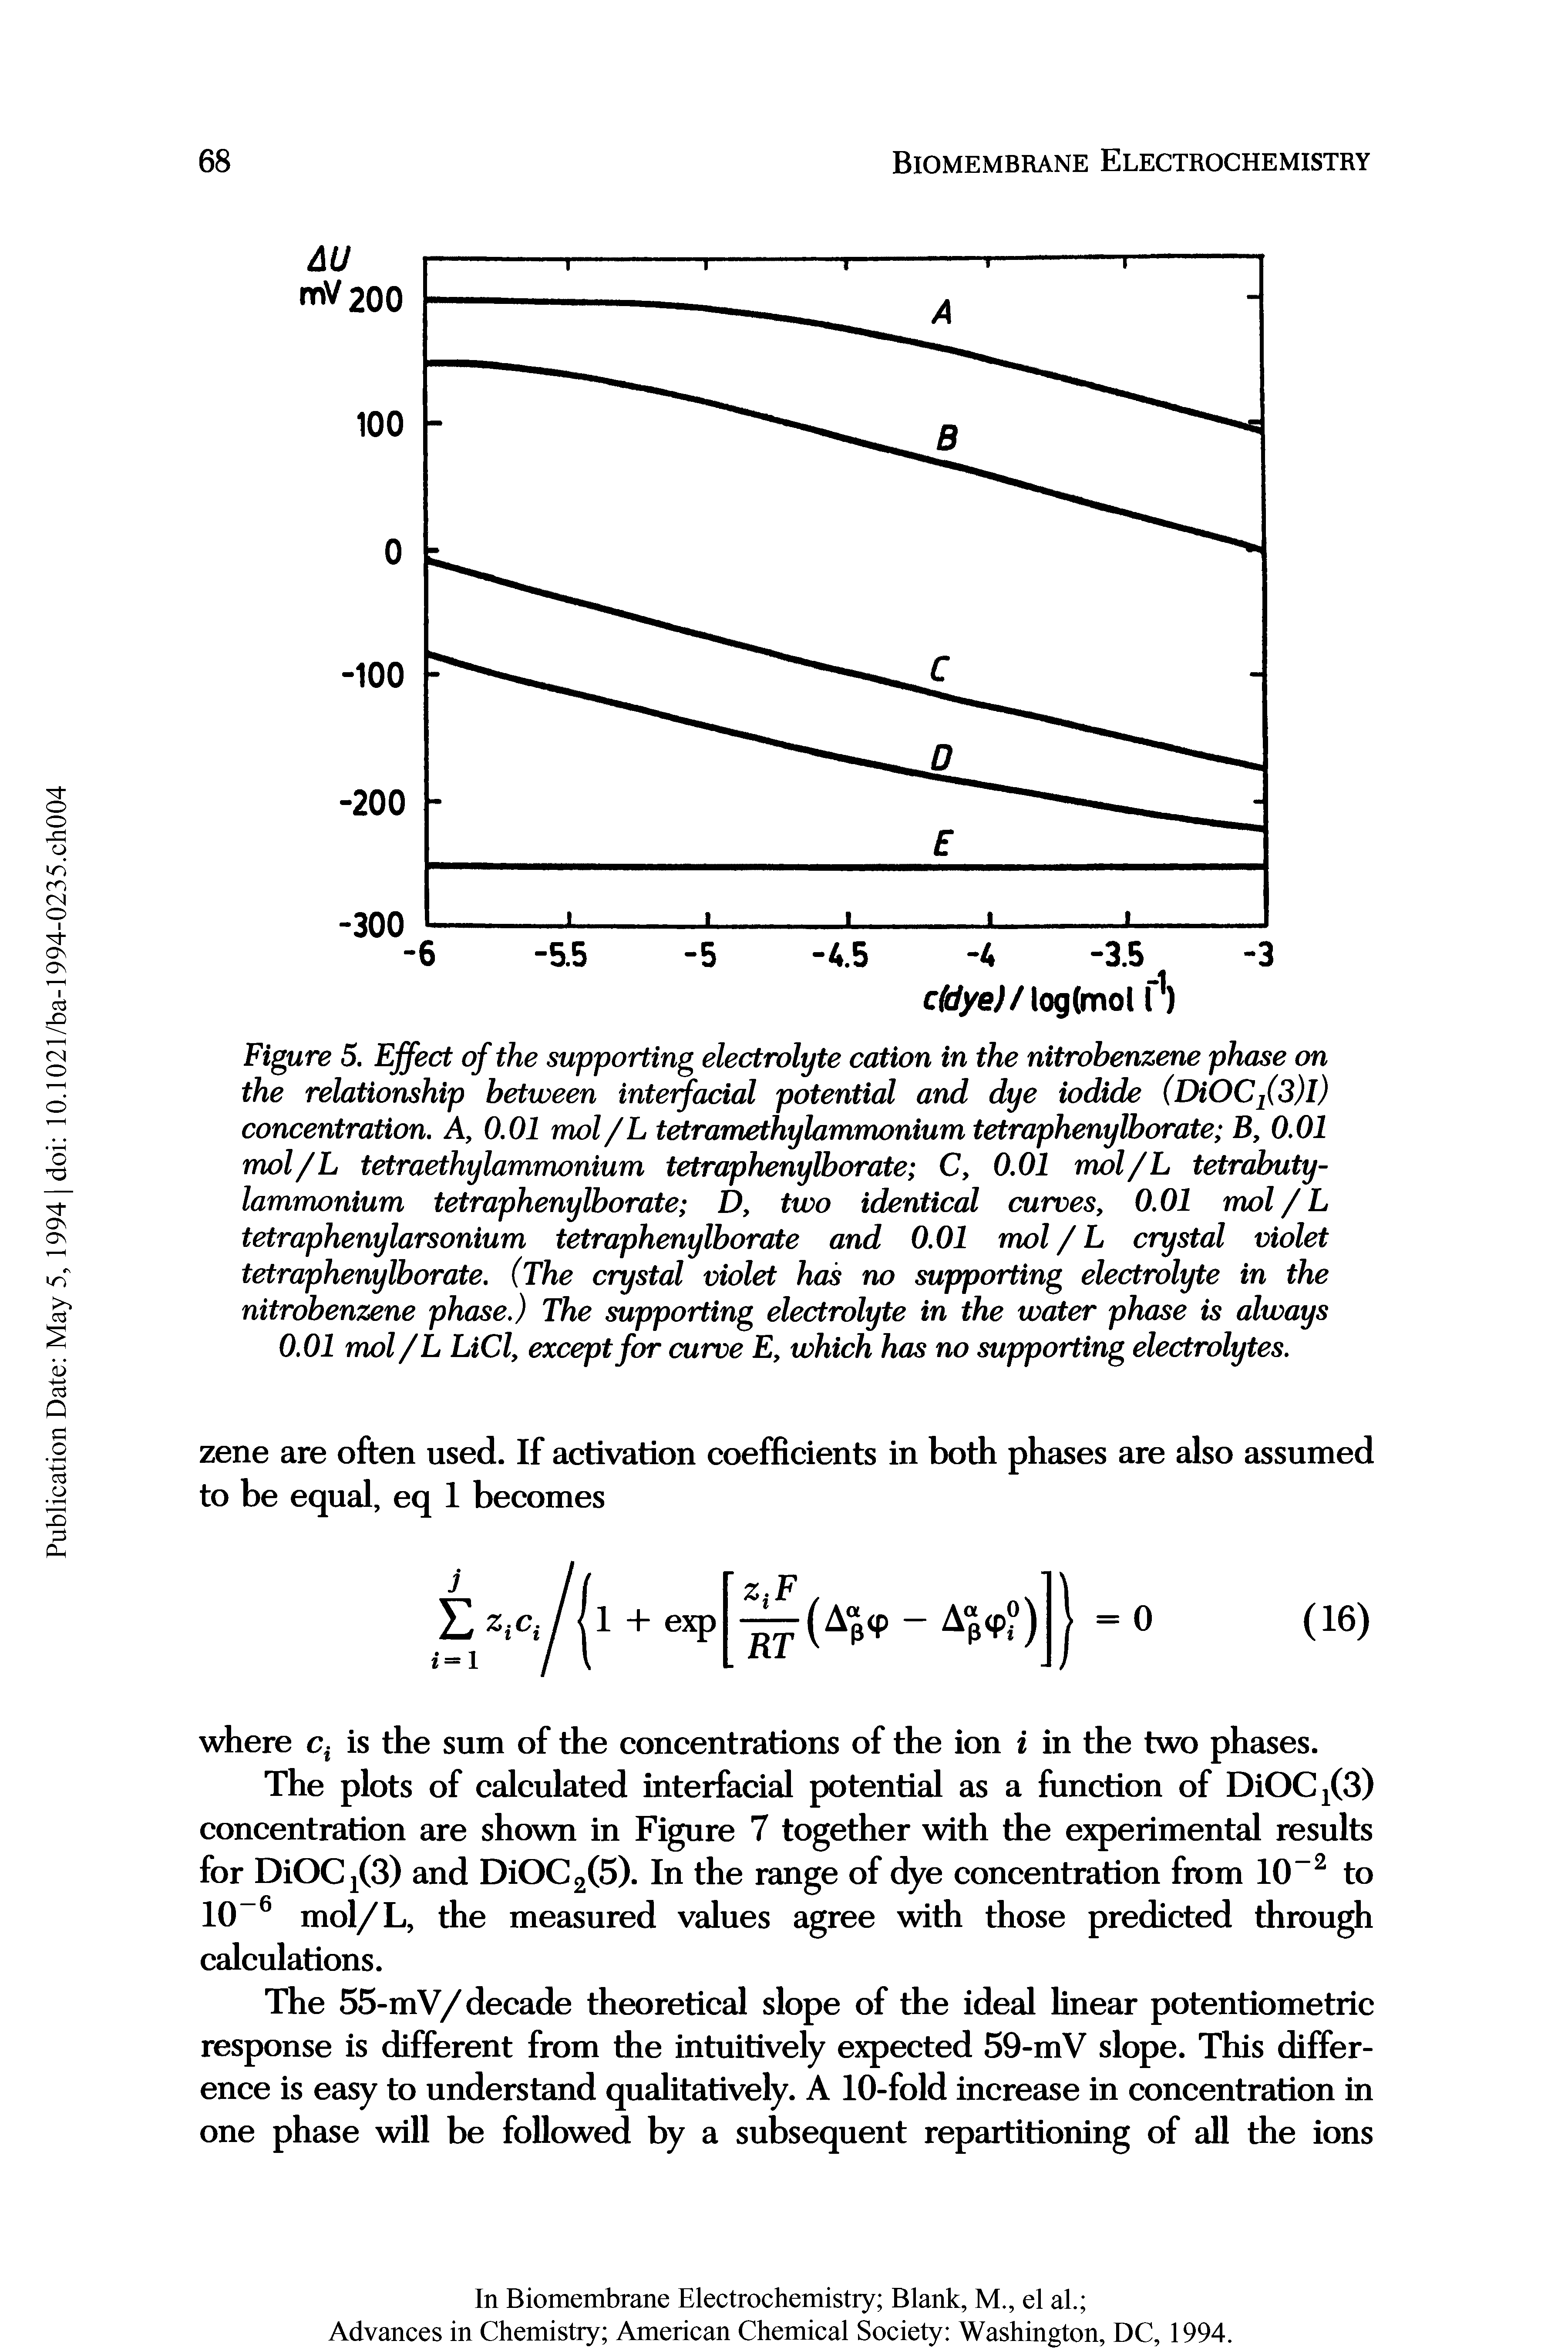 Figure 5. Effect of the supporting electrolyte cation in the nitrobenzene phase on the relationship between interfacial potential and dye iodide (DiOC2(3)1) concentration. A, 0.01 mol /L tetramethylammonium tetrapheny lb orate B, 0.01 mol/L tetraethylammonium tetrap heny lb orate C, 0.01 mol/L tetrabuty-lammonium tetrapheny lb orate D, two identical curves, 0.01 mol / L tetraphenylarsonium tetraphenylborate and 0.01 mol / L crystal violet tetraphenylborate. (The crystal violet has no supporting electrolyte in the nitrobenzene phase.) The supporting electrolyte in the water phase is always 0.01 mol/L LiCl, except for curve E, which has no supporting electrolytes.